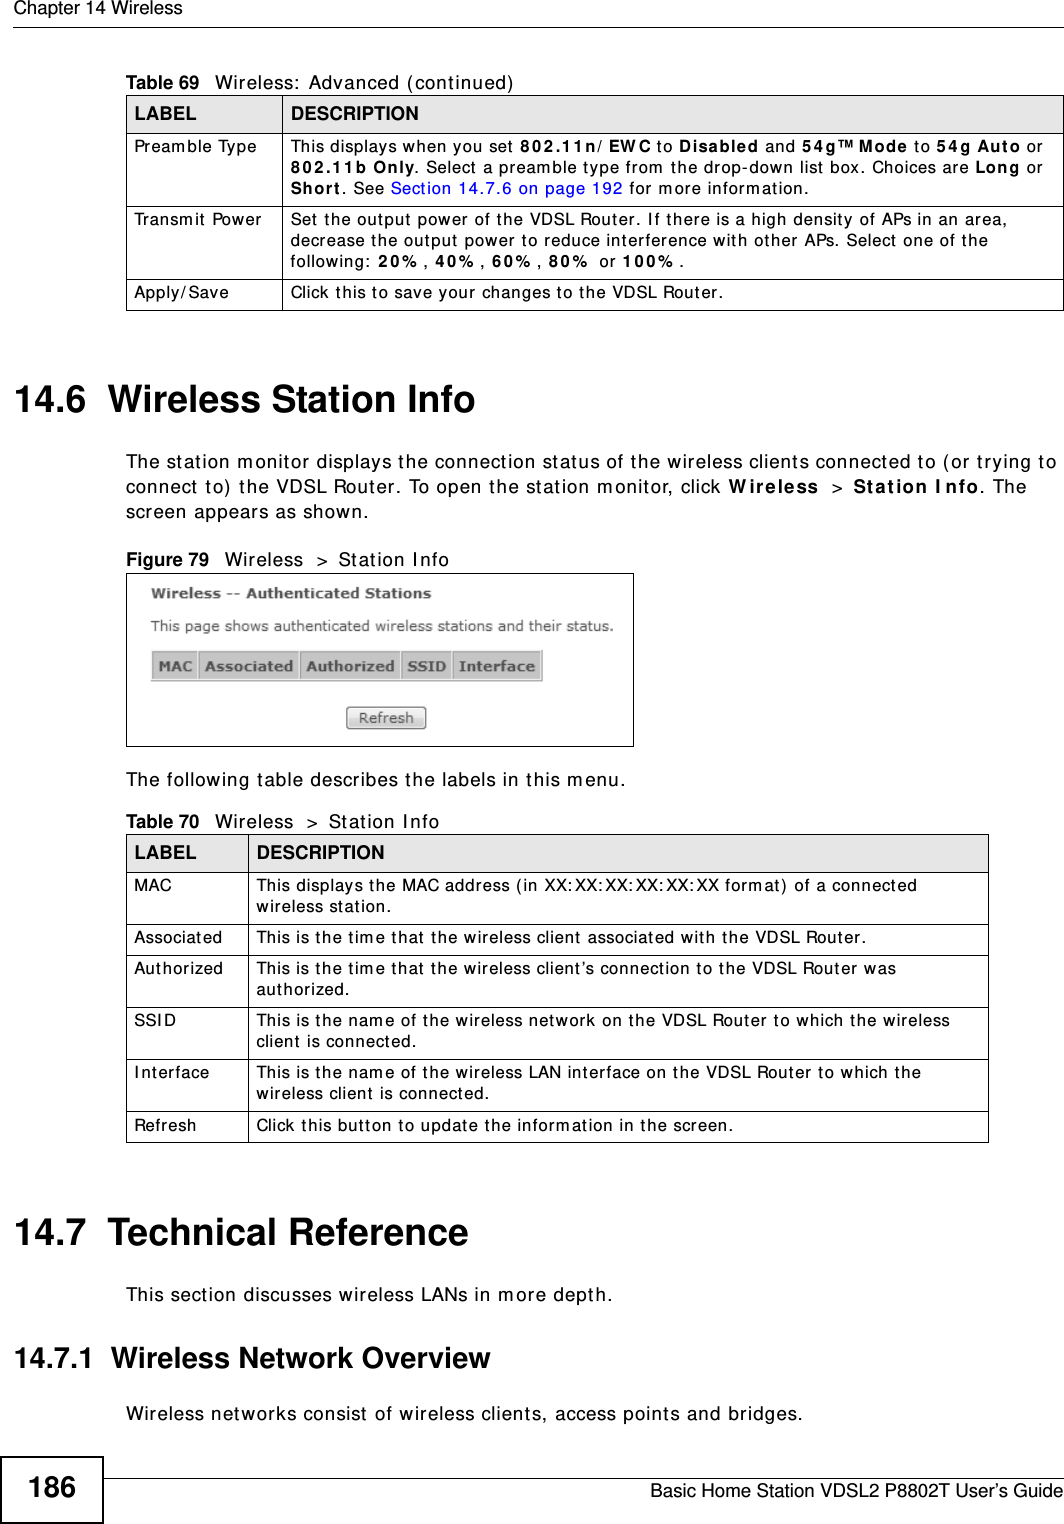 Chapter 14 WirelessBasic Home Station VDSL2 P8802T User’s Guide18614.6  Wireless Station InfoThe st at ion m onitor displays the connect ion st atus of t he wireless client s connect ed t o ( or t rying to connect  to)  the VDSL Router . To open t he st at ion m onitor, click W ir ele ss  &gt; Stat ion I nfo. The screen appear s as shown.Figure 79   Wireless  &gt;  St at ion I nfoThe following t able describes t he labels in t his m enu.14.7  Technical ReferenceThis sect ion discusses wireless LANs in m ore dept h. 14.7.1  Wireless Network OverviewWireless net works consist of wireless client s, access points and bridges. Preamble Type This displays when you set 8 0 2 .1 1 n/ EW C to D isa ble d and 5 4 g™ M ode to 5 4 g Aut o or  8 0 2 .1 1 b Only. Select  a pream ble ty pe from  the drop-down list  box. Choices ar e Long or  Sh or t . See Sect ion 14.7.6 on page 192 for m ore inform at ion.Transm it Power  Set the output power of the VDSL Rout er. I f t here is a high density of APs in an area, decrease the out put power  t o reduce int er ference with ot her  APs. Select one of the follow ing:  2 0 % , 4 0 % , 6 0 % , 8 0 %  or 1 0 0 % . Apply/ Save Click  t his to save your  changes to the VDSL Router.Table 69   Wireless:  Advanced ( continued)LABEL DESCRIPTIONTable 70   Wireless  &gt;  St at ion I nfoLABEL DESCRIPTIONMAC  This displays the MAC address (in XX: XX: XX: XX: XX: XX for m at )  of a connect ed wireless station. Associat ed This is the t im e t hat  the wir eless client  associat ed with the VDSL Rout er .Aut horized This is the t im e t hat t he wir eless client ’s connect ion t o t he VDSL Rout er was authorized.SSI D This is t he nam e of the wireless netw ork on the VDSL Rout er t o which the wireless client  is connect ed.I nter face This is t he nam e of the wireless LAN inter face on the VDSL Rout er t o which the wireless client is connected.Refresh Click this but ton to updat e the inform at ion in the screen.